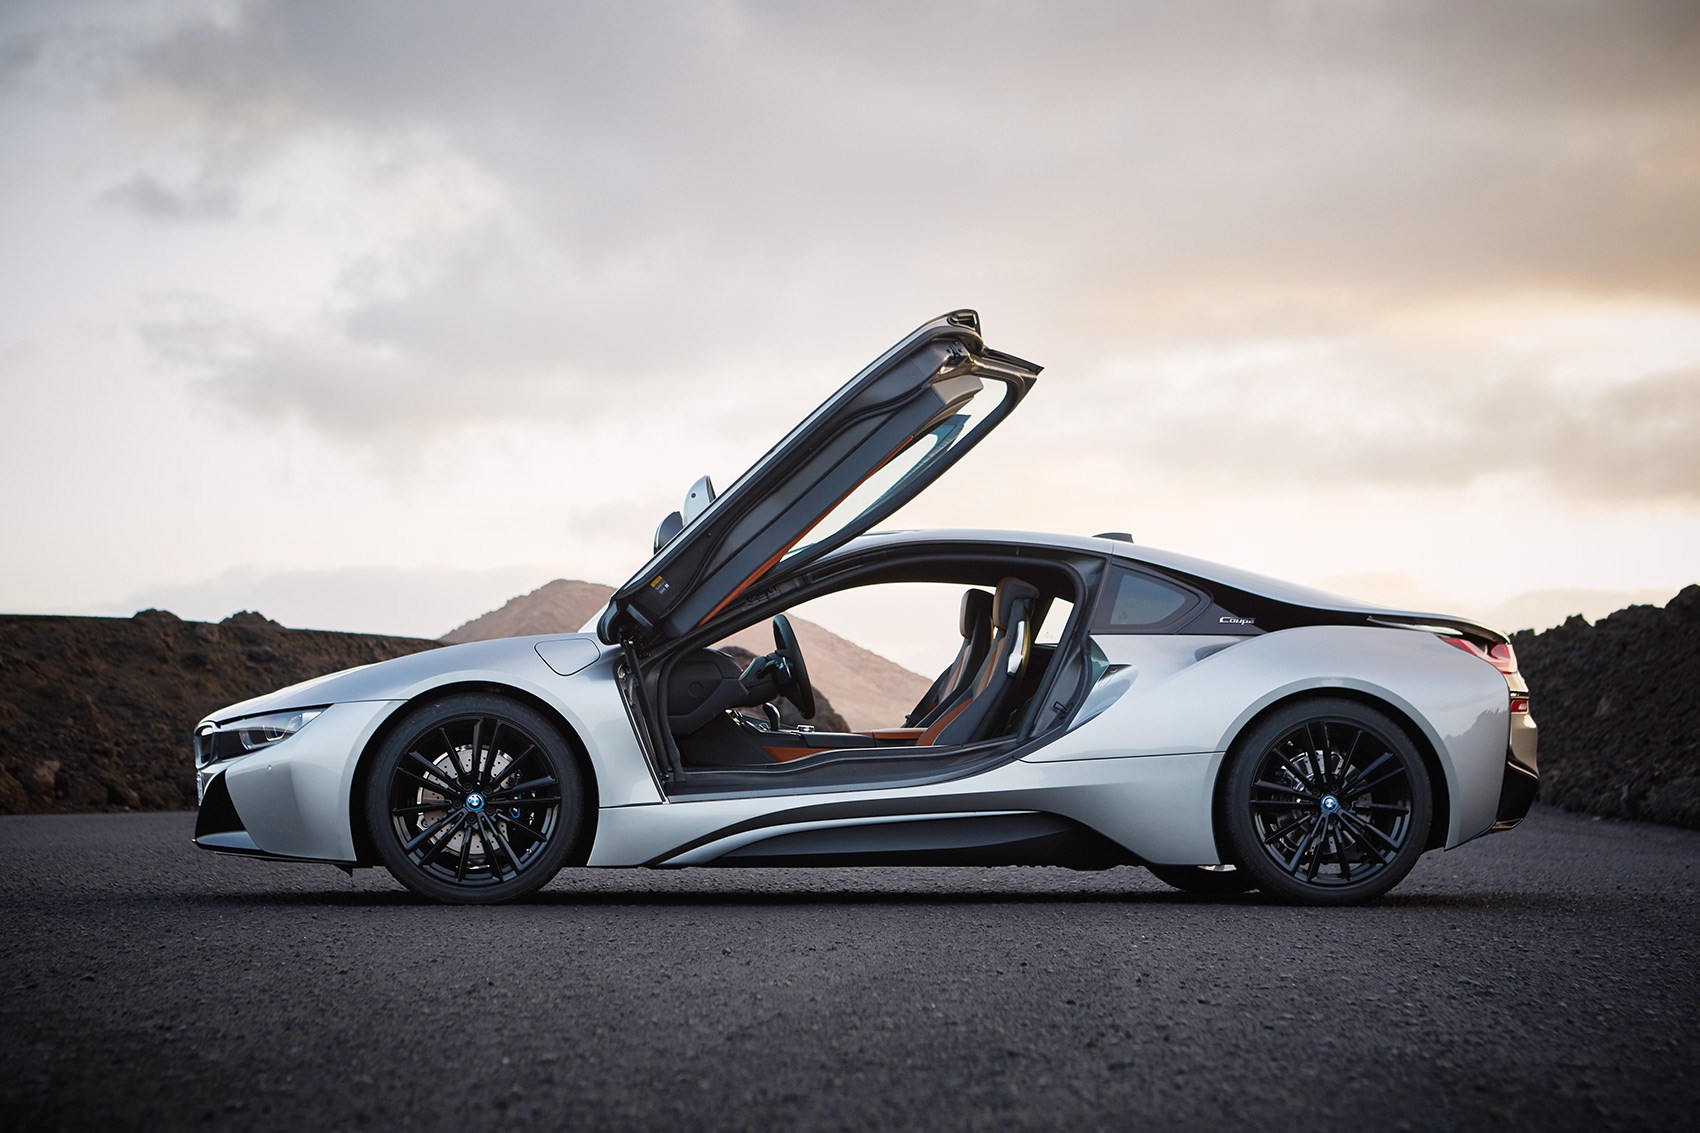 New 2018 BMW i8 Coupe and Roadster news, specs, photos, UK prices | CAR ...